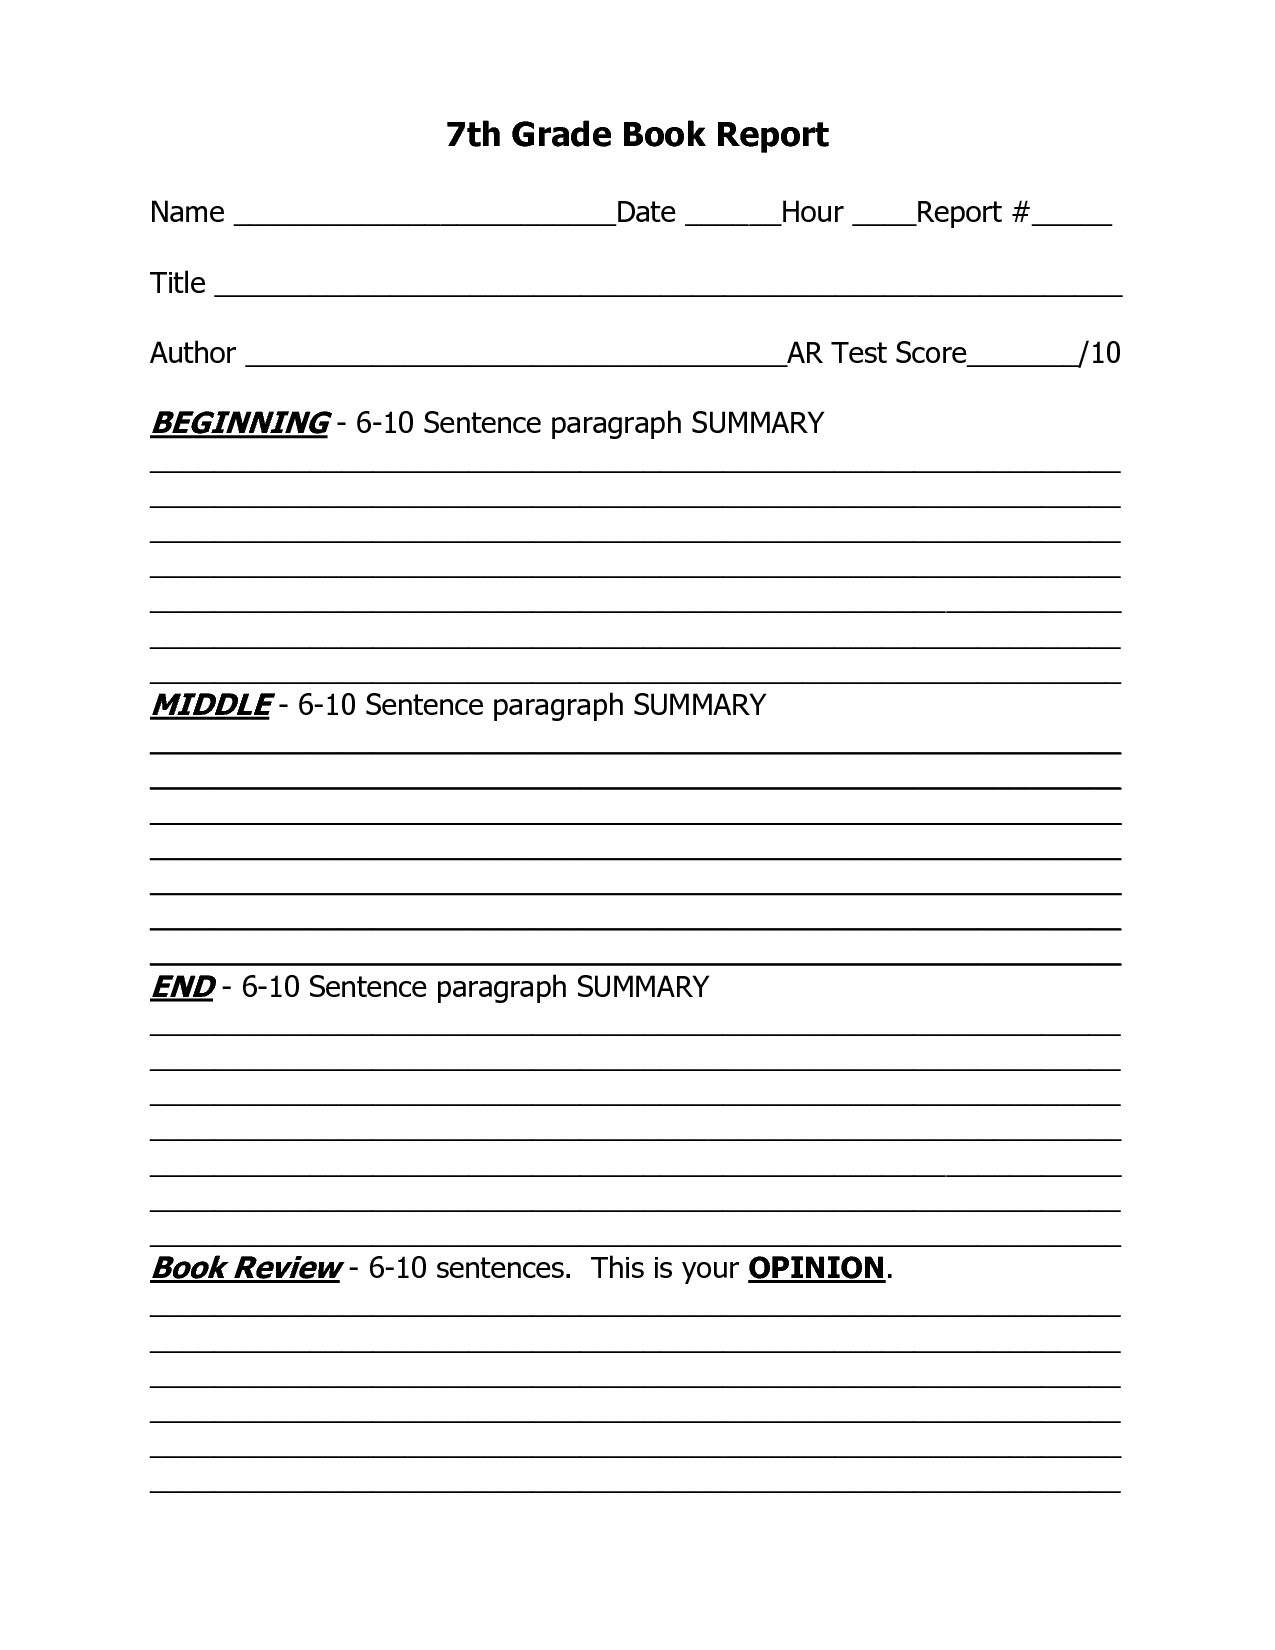 Creative Book Report Ideas For First Grade Worksheets Kids With Regard To First Grade Book Report Template